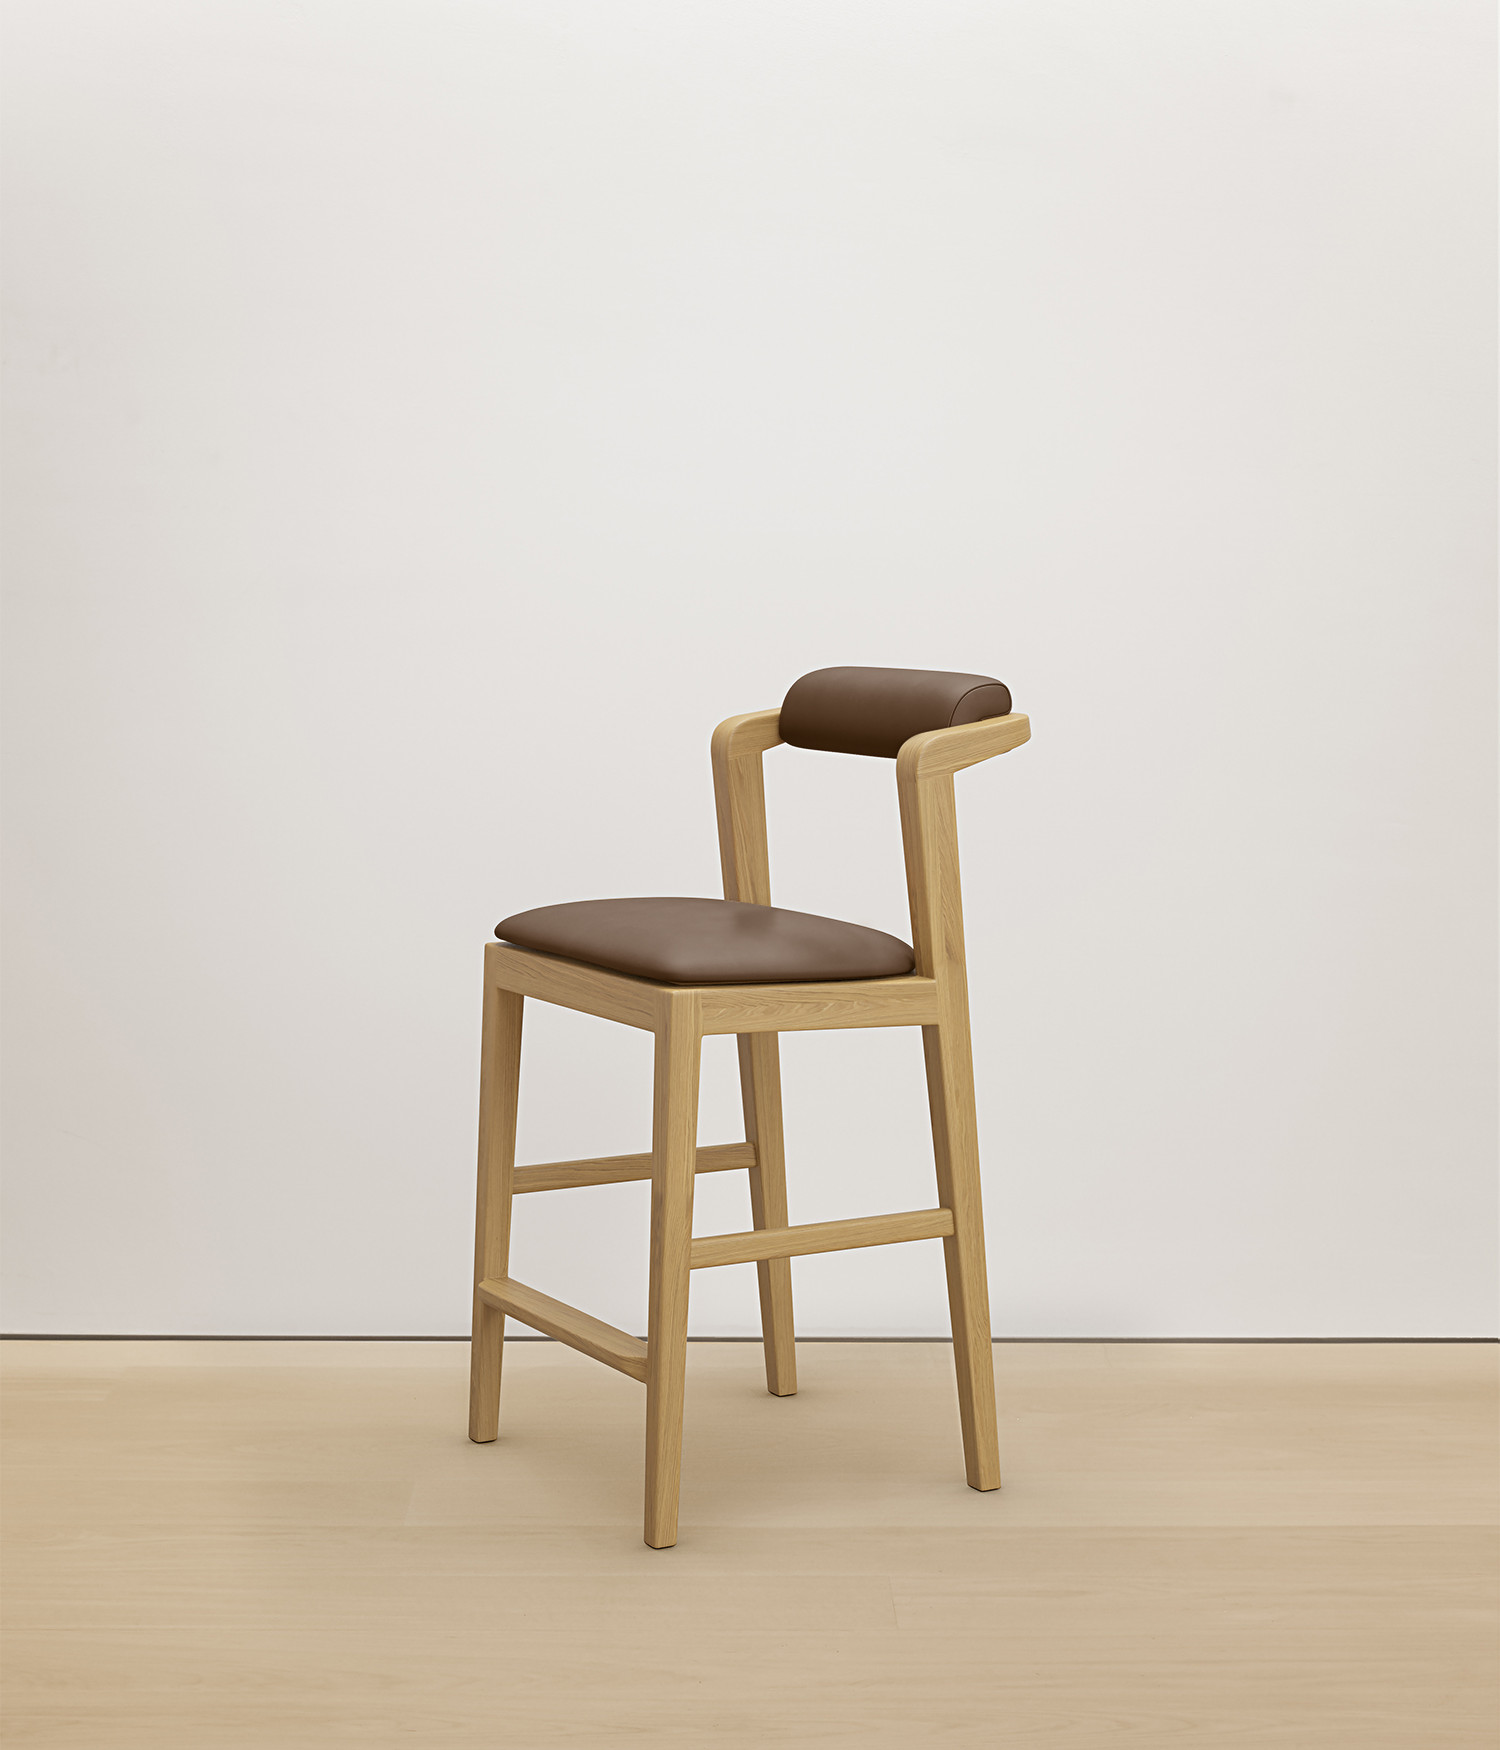  white-oak stool with umber color upholstered seat